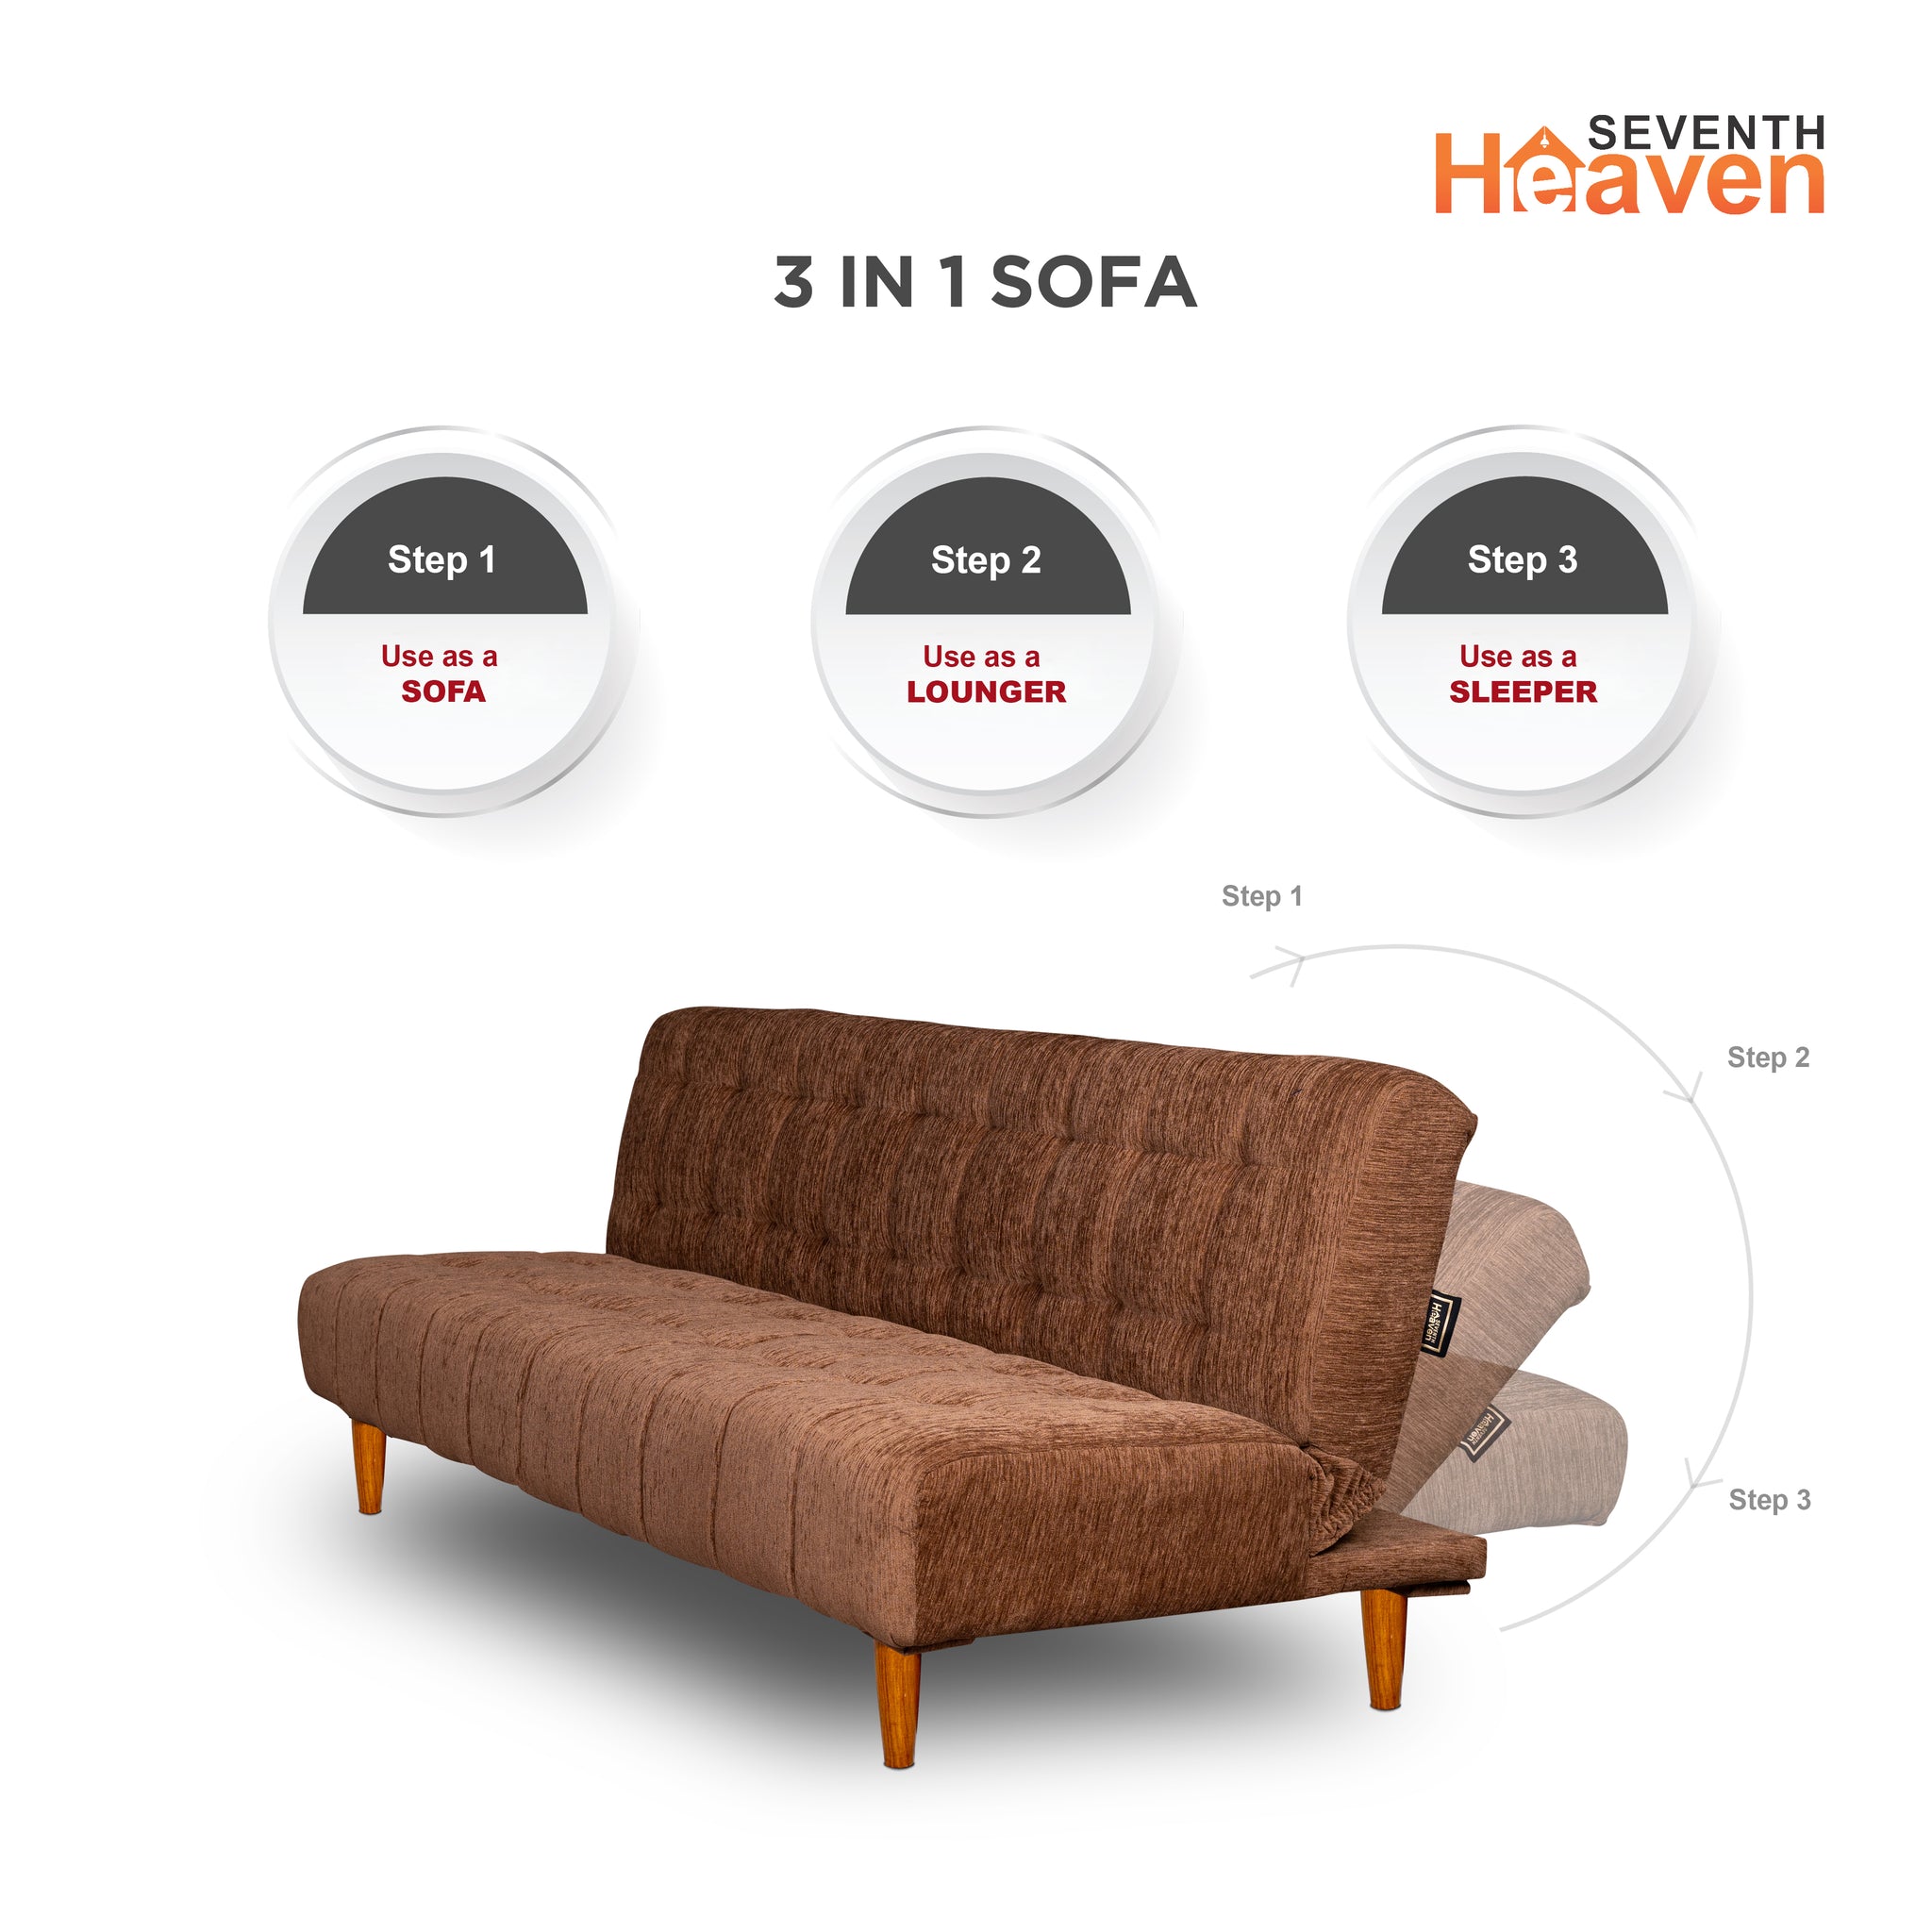 Seventh Heaven Florida Neo 4 Seater Wooden Sofa Cum Bed Modern & Elegant Smart Furniture Range for luxurious homes, living rooms and offices. Use as a sofa, lounger or bed. Perfect for guests. Beige Colour Molphino fabric with sheesham polished wooden legs.